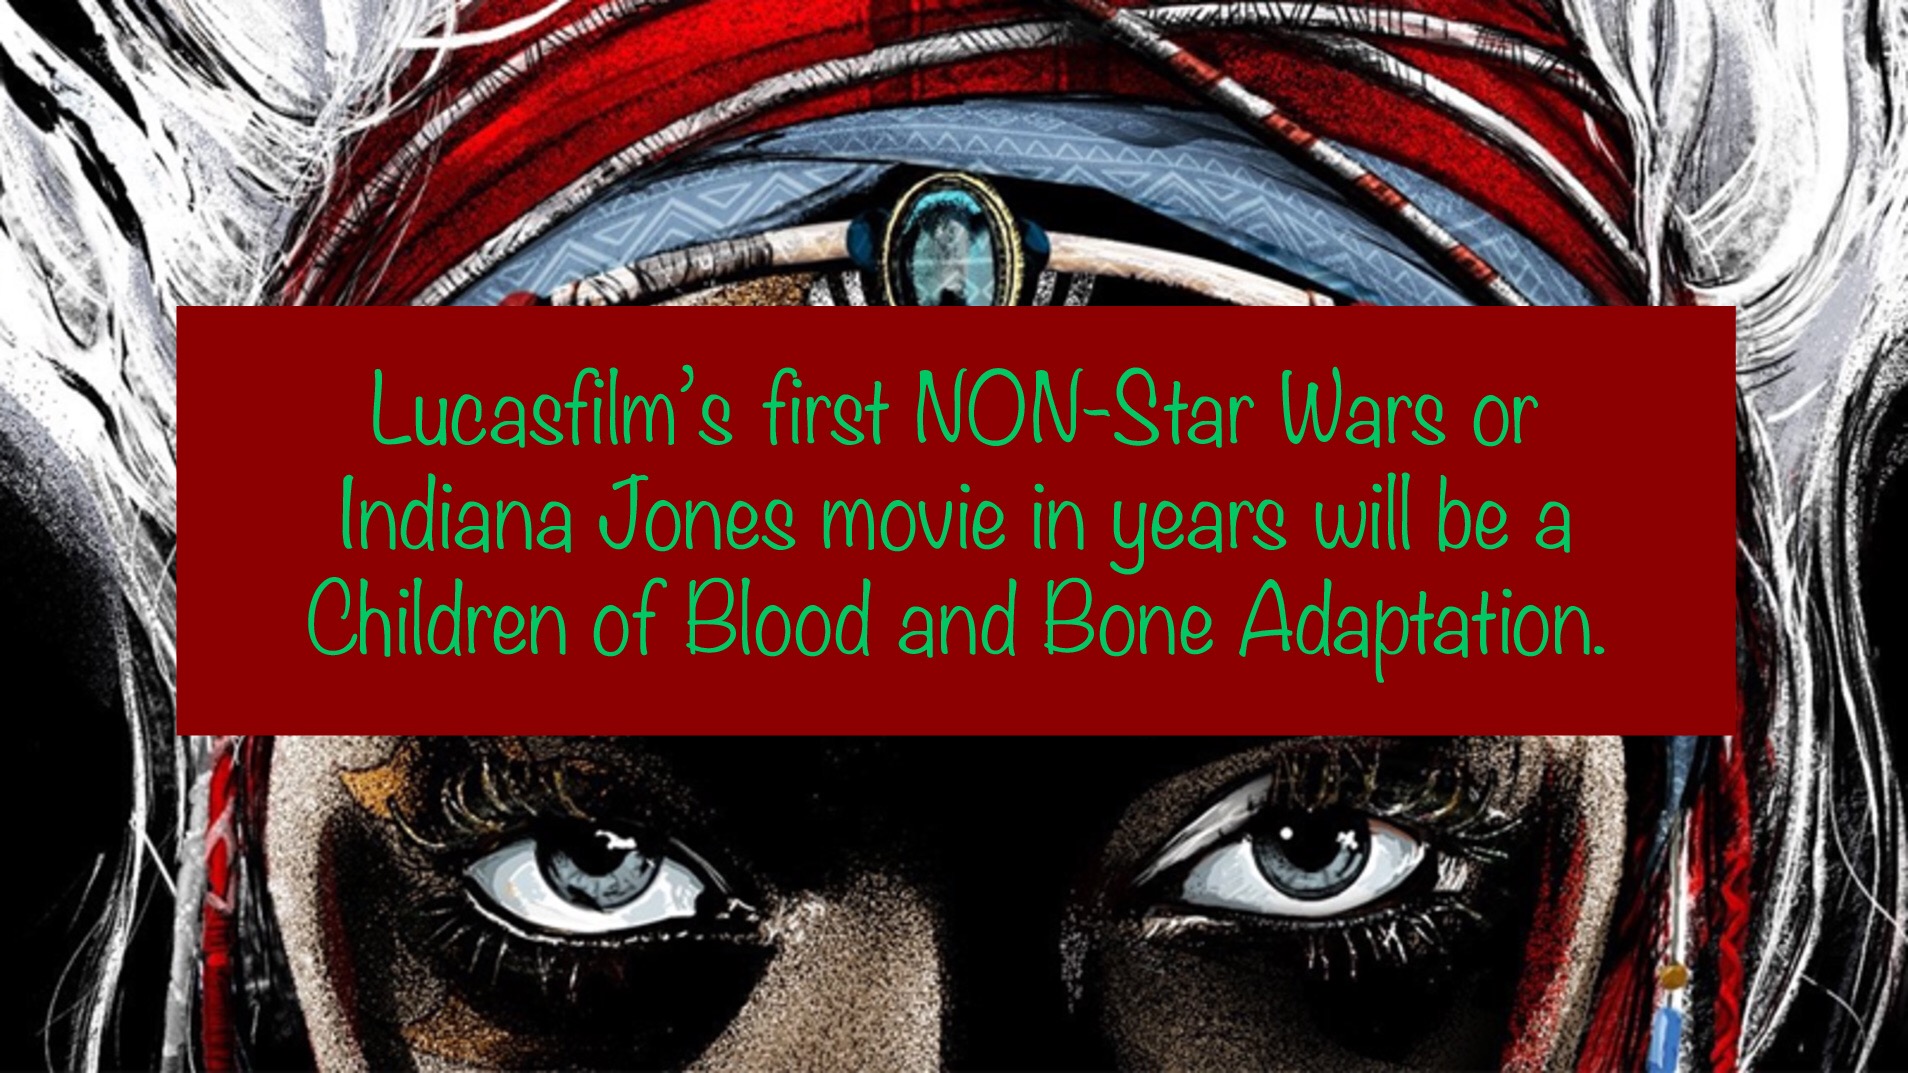 Children of Blood and Bone - Lucasfilm's first NonStar Wars or Indiana Jones movie in years will be a Children of Blood and Bone Adaptation.